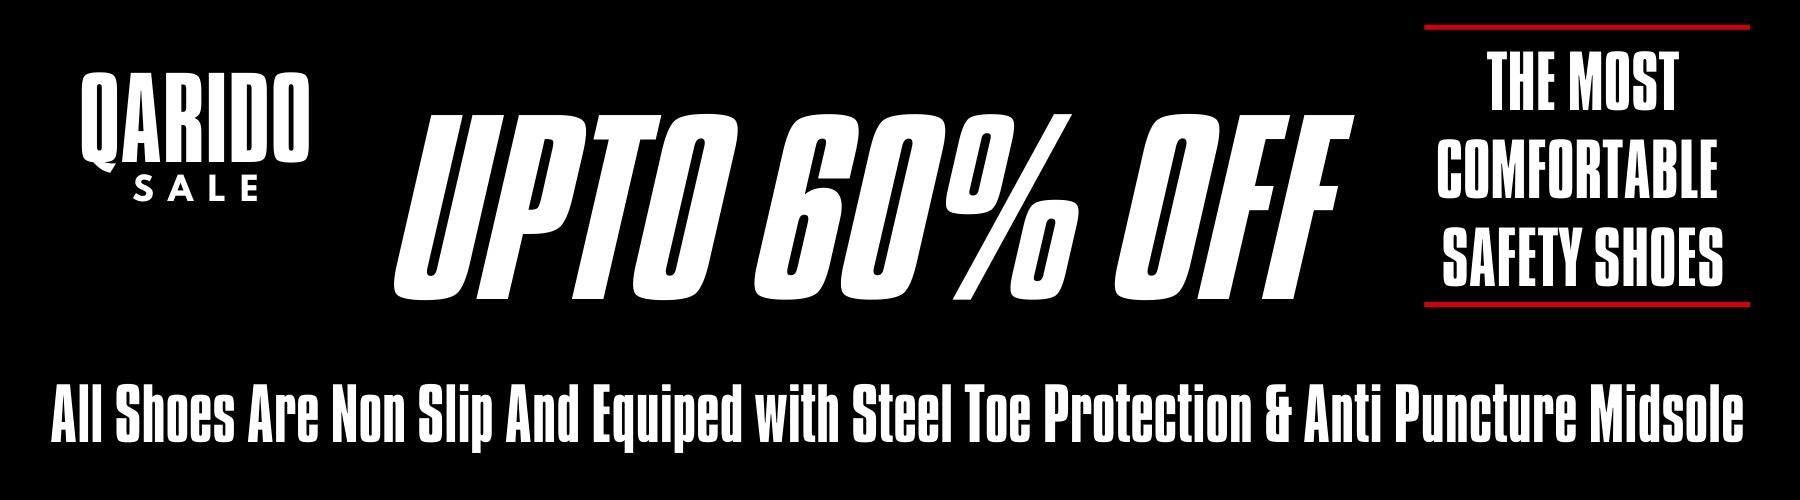 Comfortable safety shoes | comfortable work shoes | comfortable work boots | comfortable safety trainers | lightweight safety trainers | lightweight safety shoes | comfortable steel toe shoes | comfortable steel toe boots